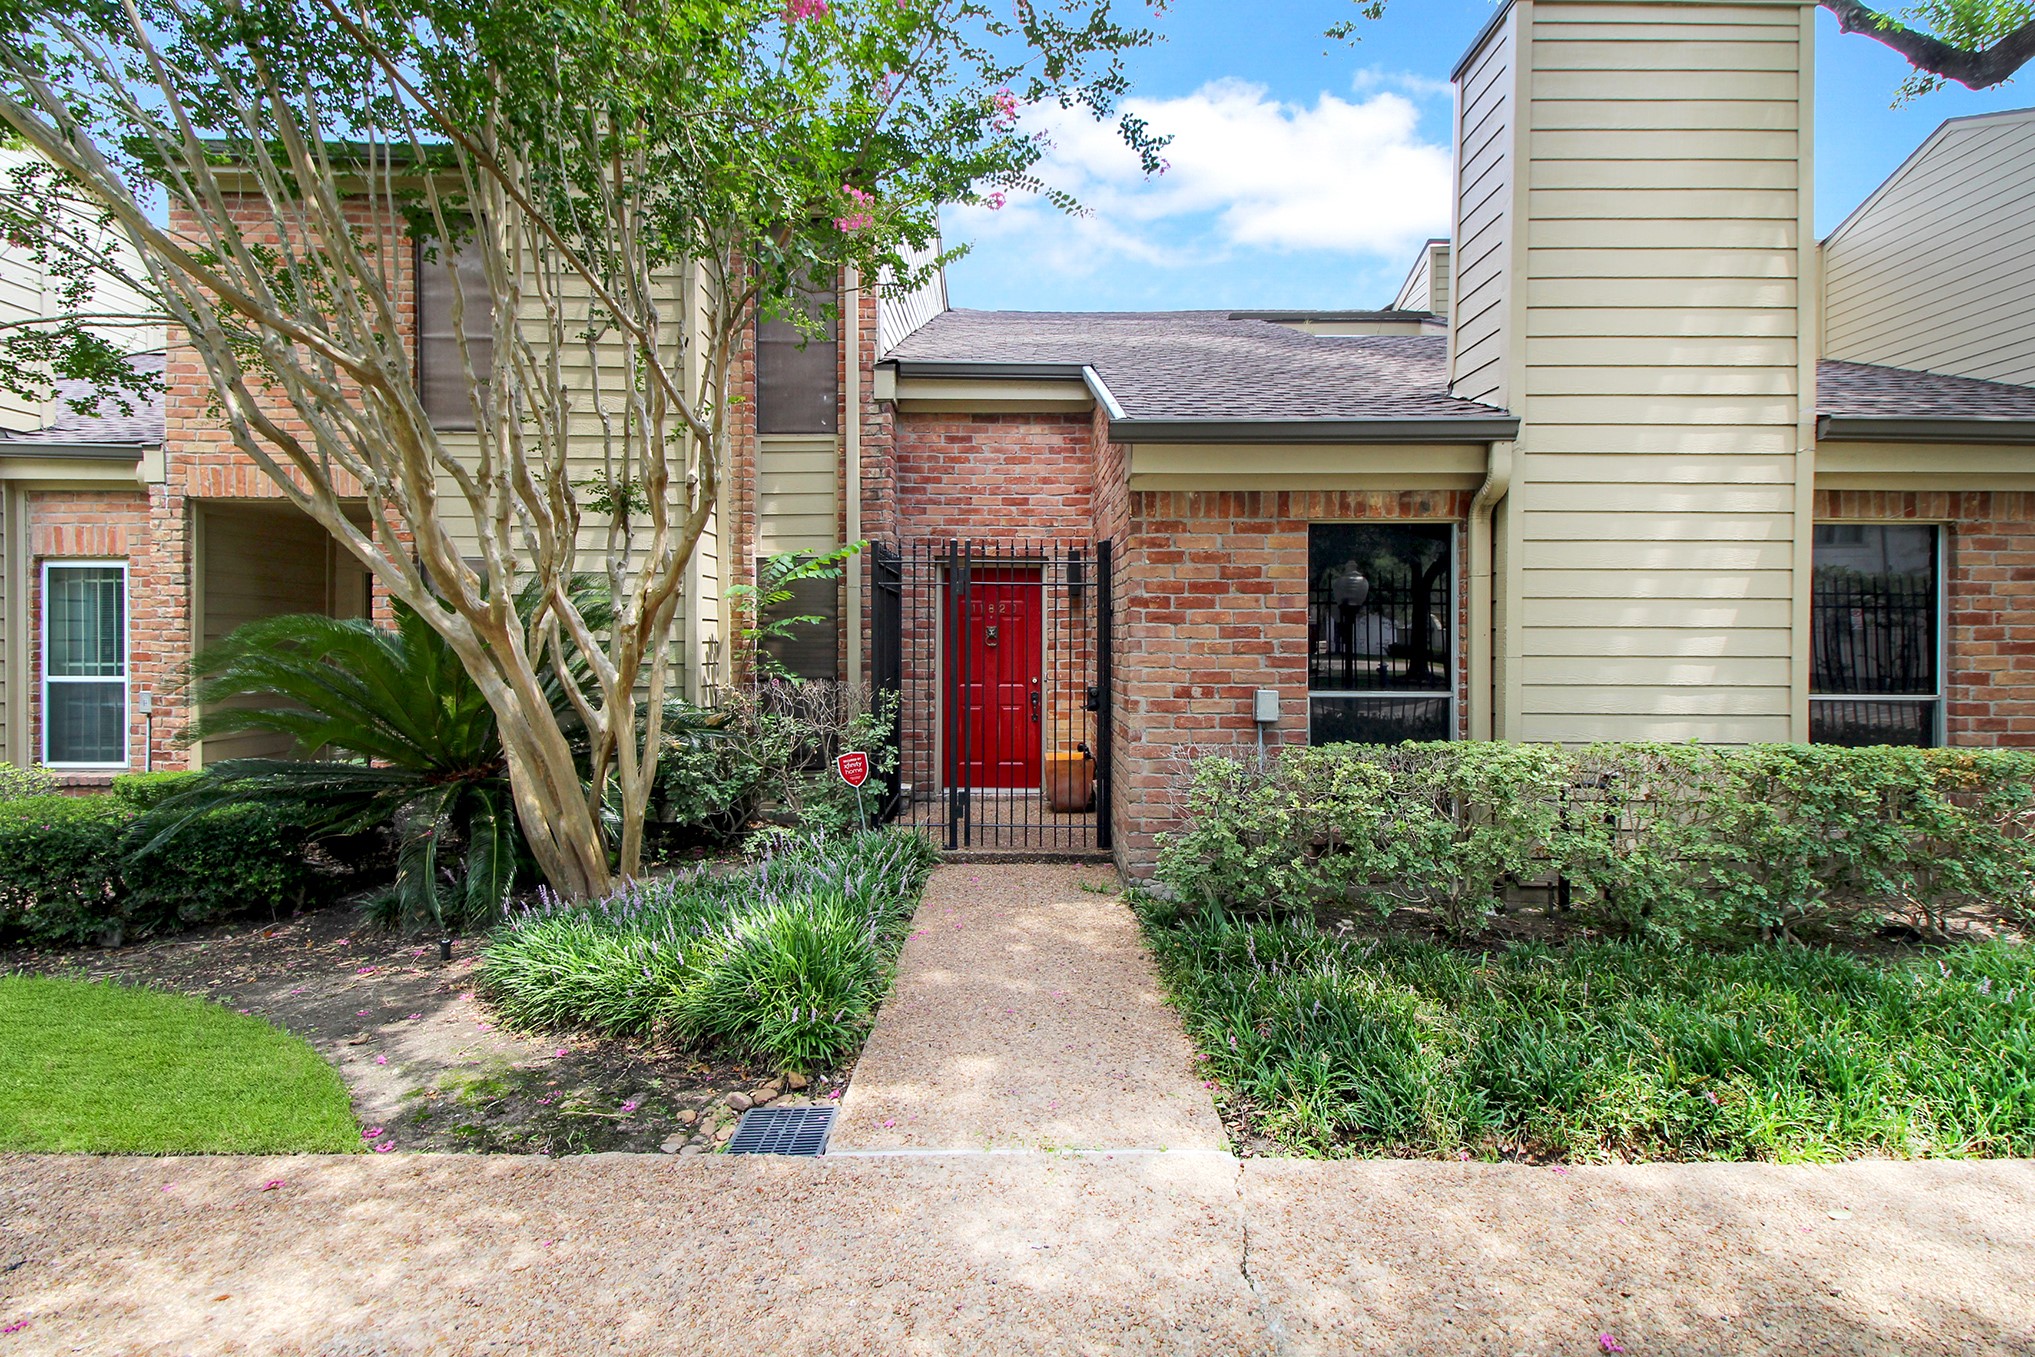 Welcome Home! 11820 Berryknoll Ln! Amazing home. Welcoming Red front door with a court yard.  Automatic gate when entering and 2 car garage for you to park in. This is a well planned Gated Complex with Town Homes.